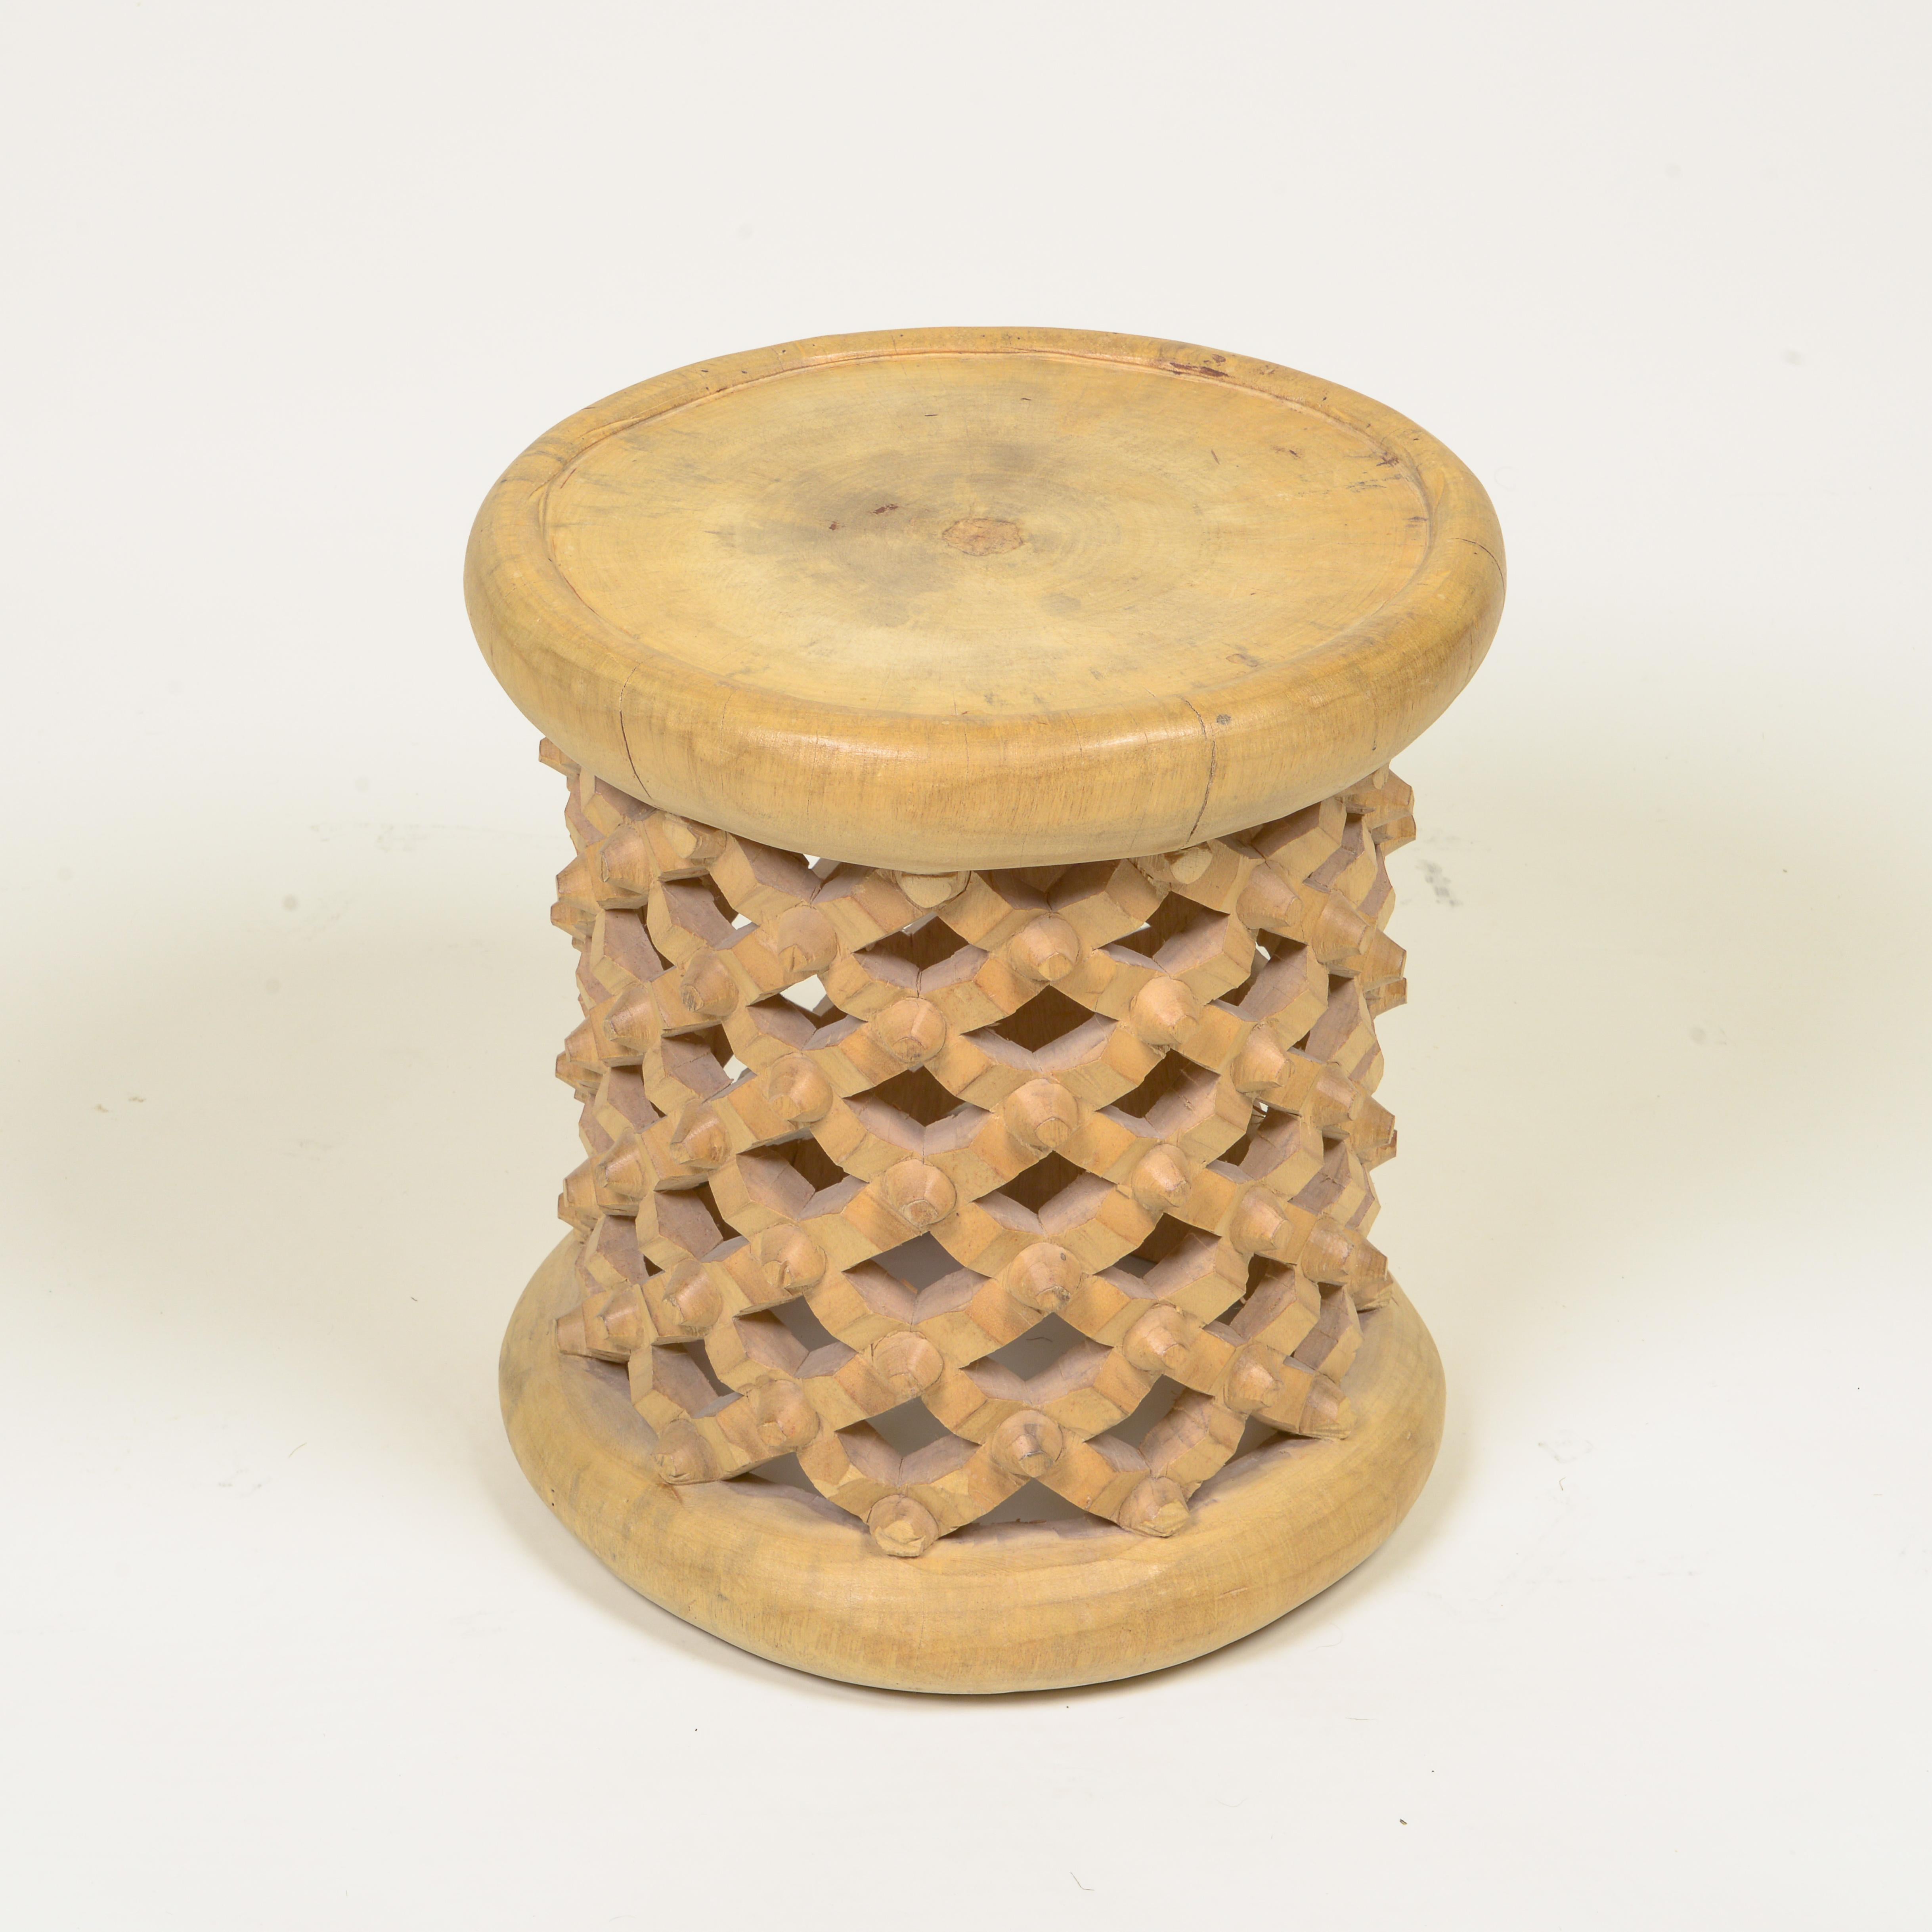 Hand-carved cylindrical Bamileke wood stool with traditional intricate lattice pattern.
